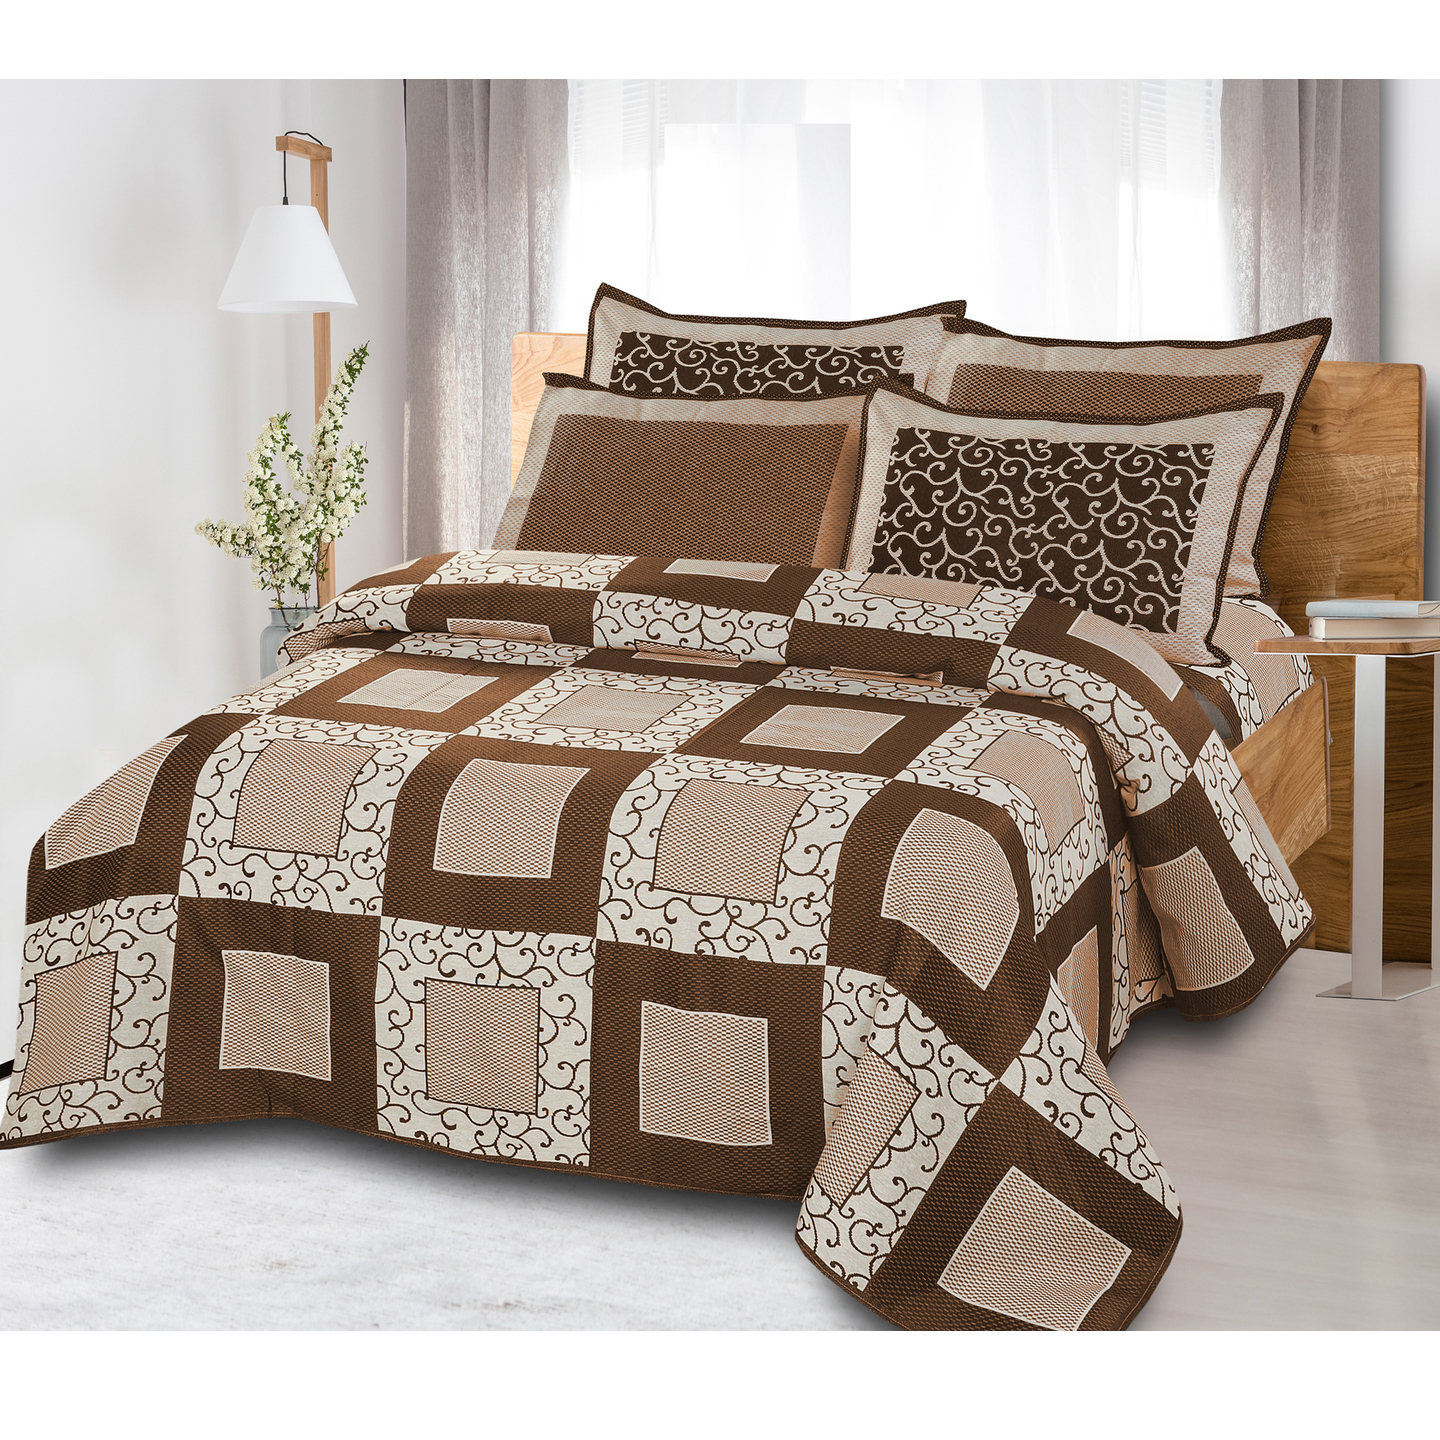 Handtex Home Jacquard design cotton double bedsheet 90x100 inch with 2 pillow cover camel